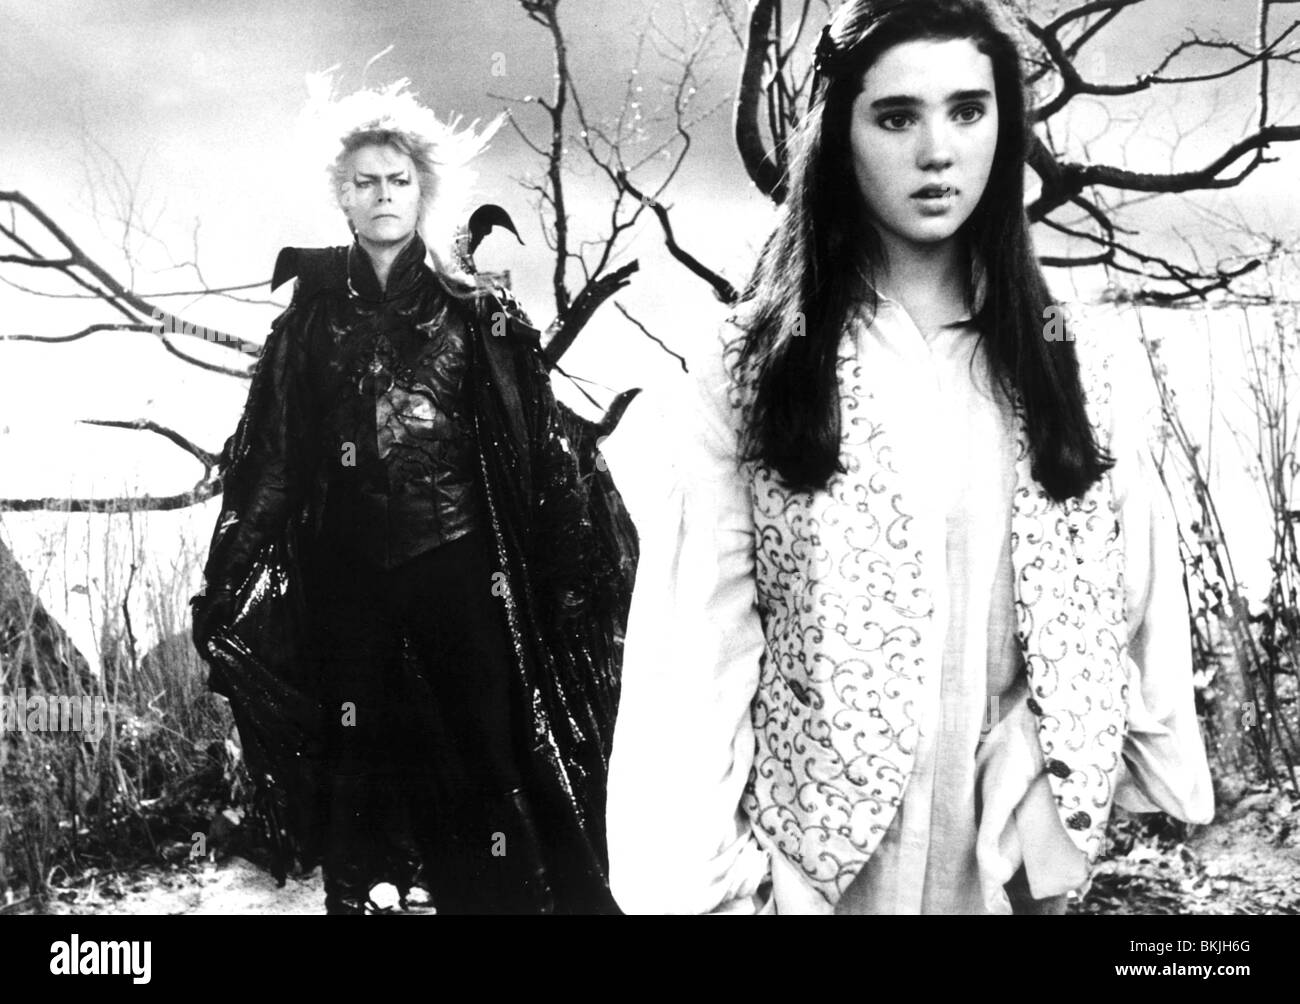 David Bowie & Jennifer Connelly UNSIGNED photo Labyrinth NEW IMAGE!! N3249 